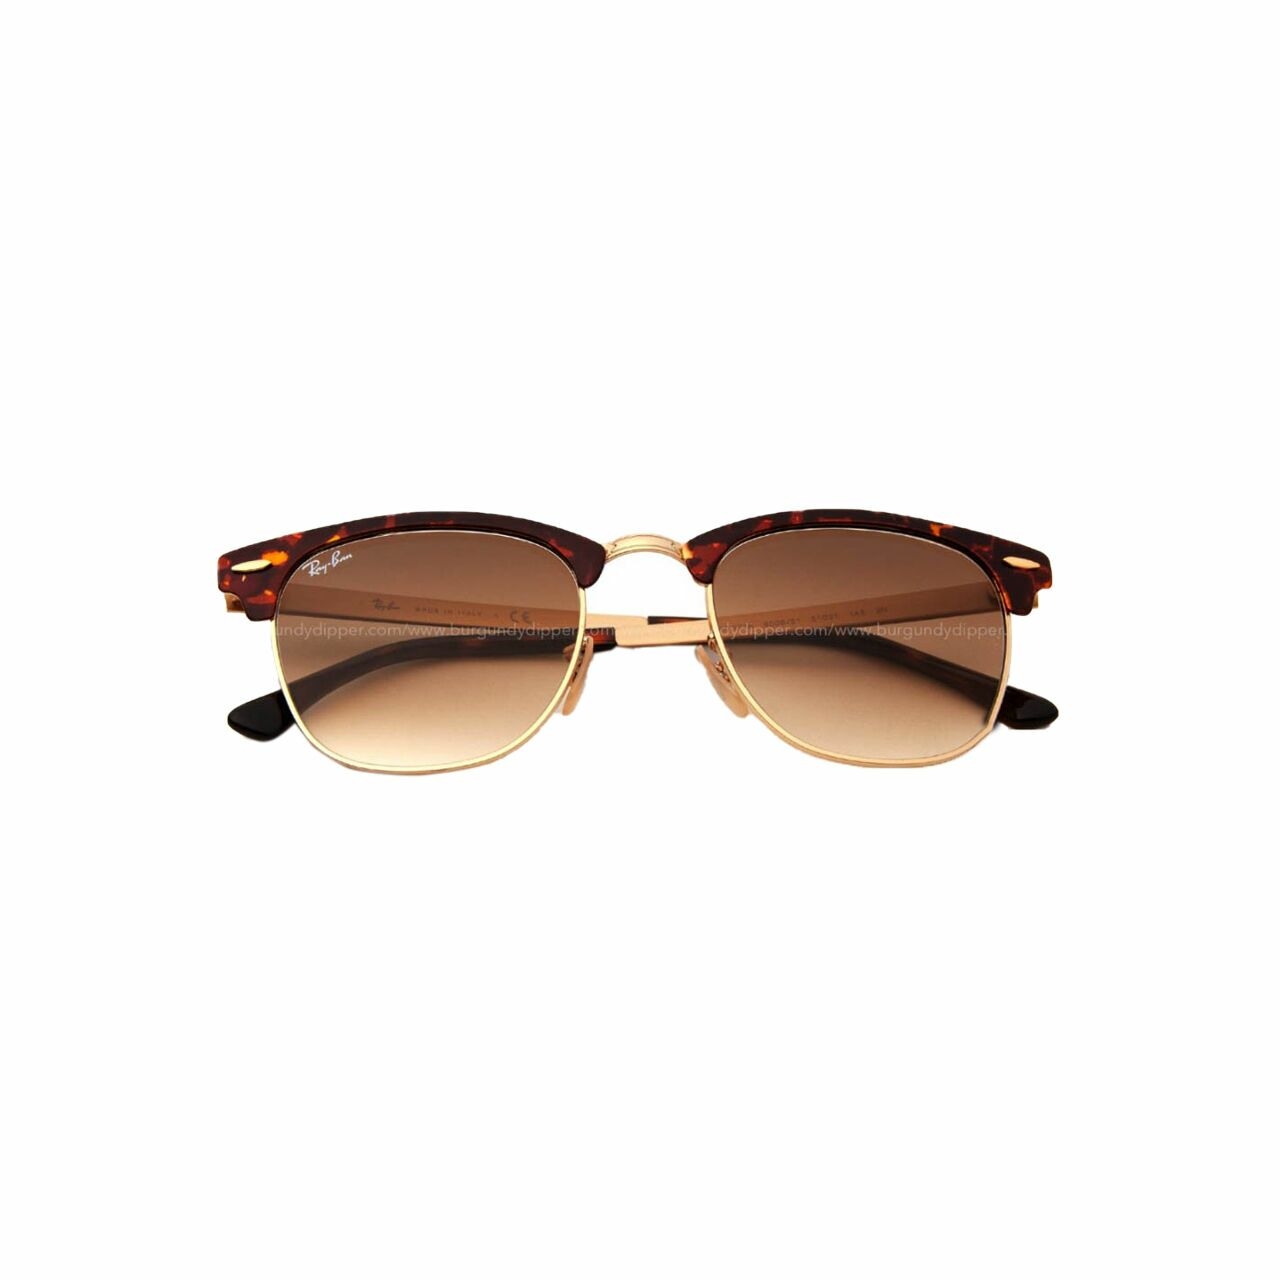 Ray-ban Clubmaster Metal Havana On Arista Clear Gradient Brown Sunglasses